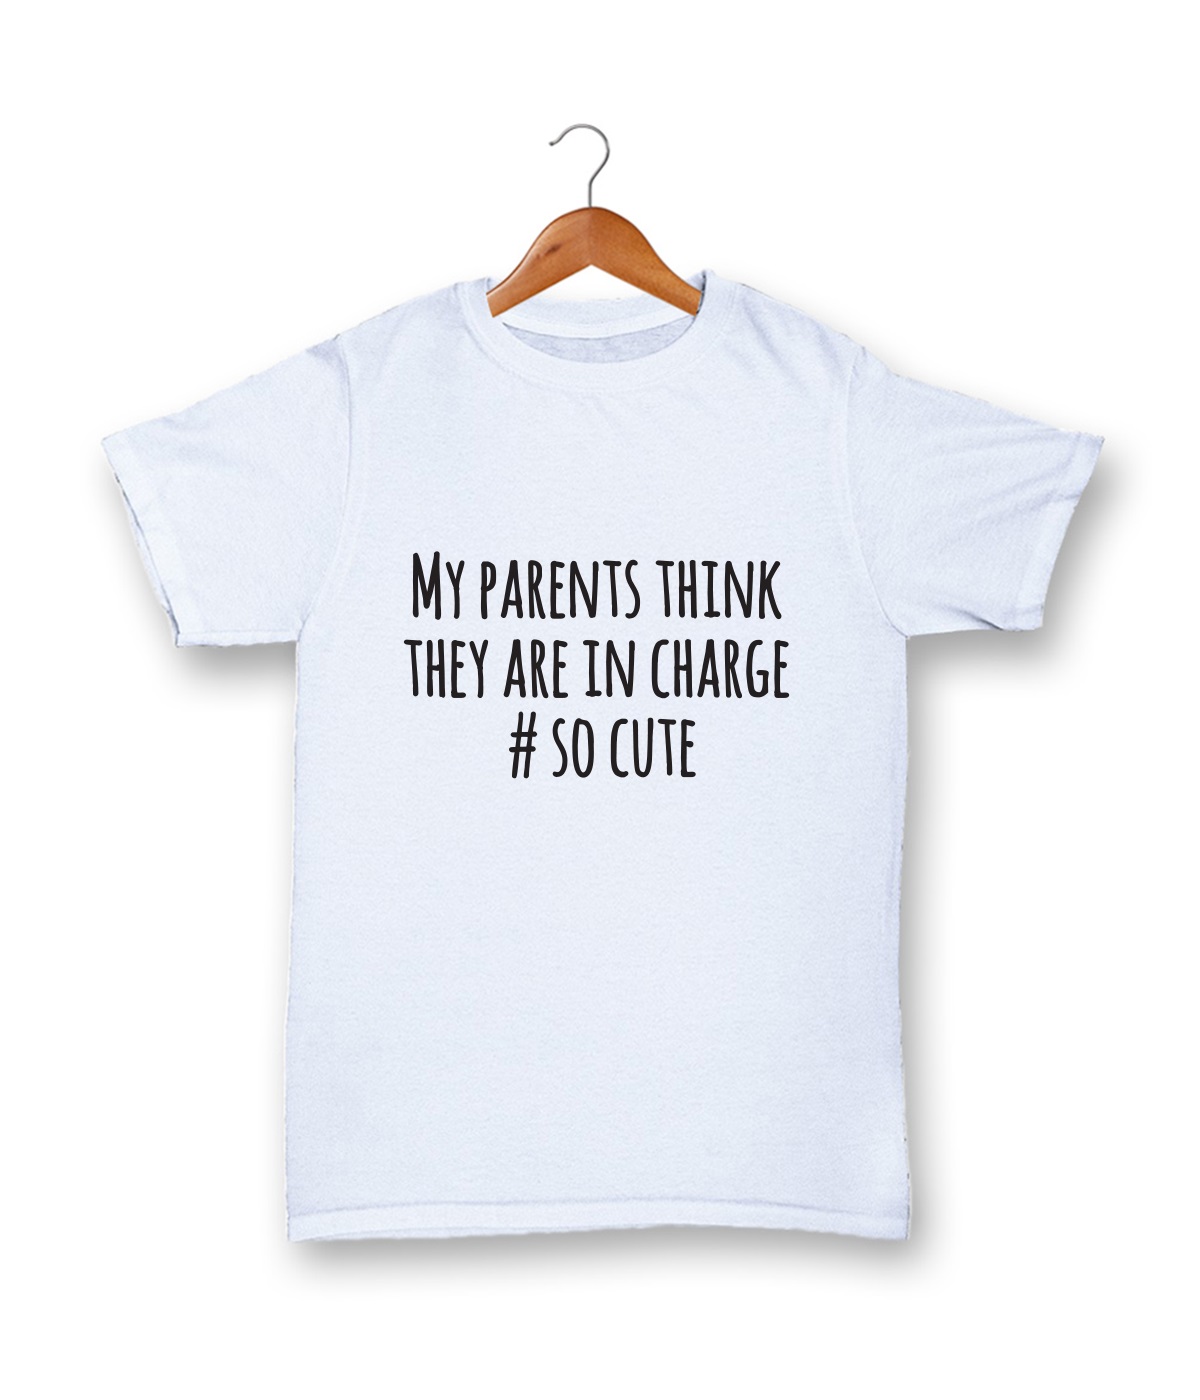 White T-shirt, 100% cotton, machine washable. Age 1-2 years. Print: My Parents Think They Are In Charge #socute.